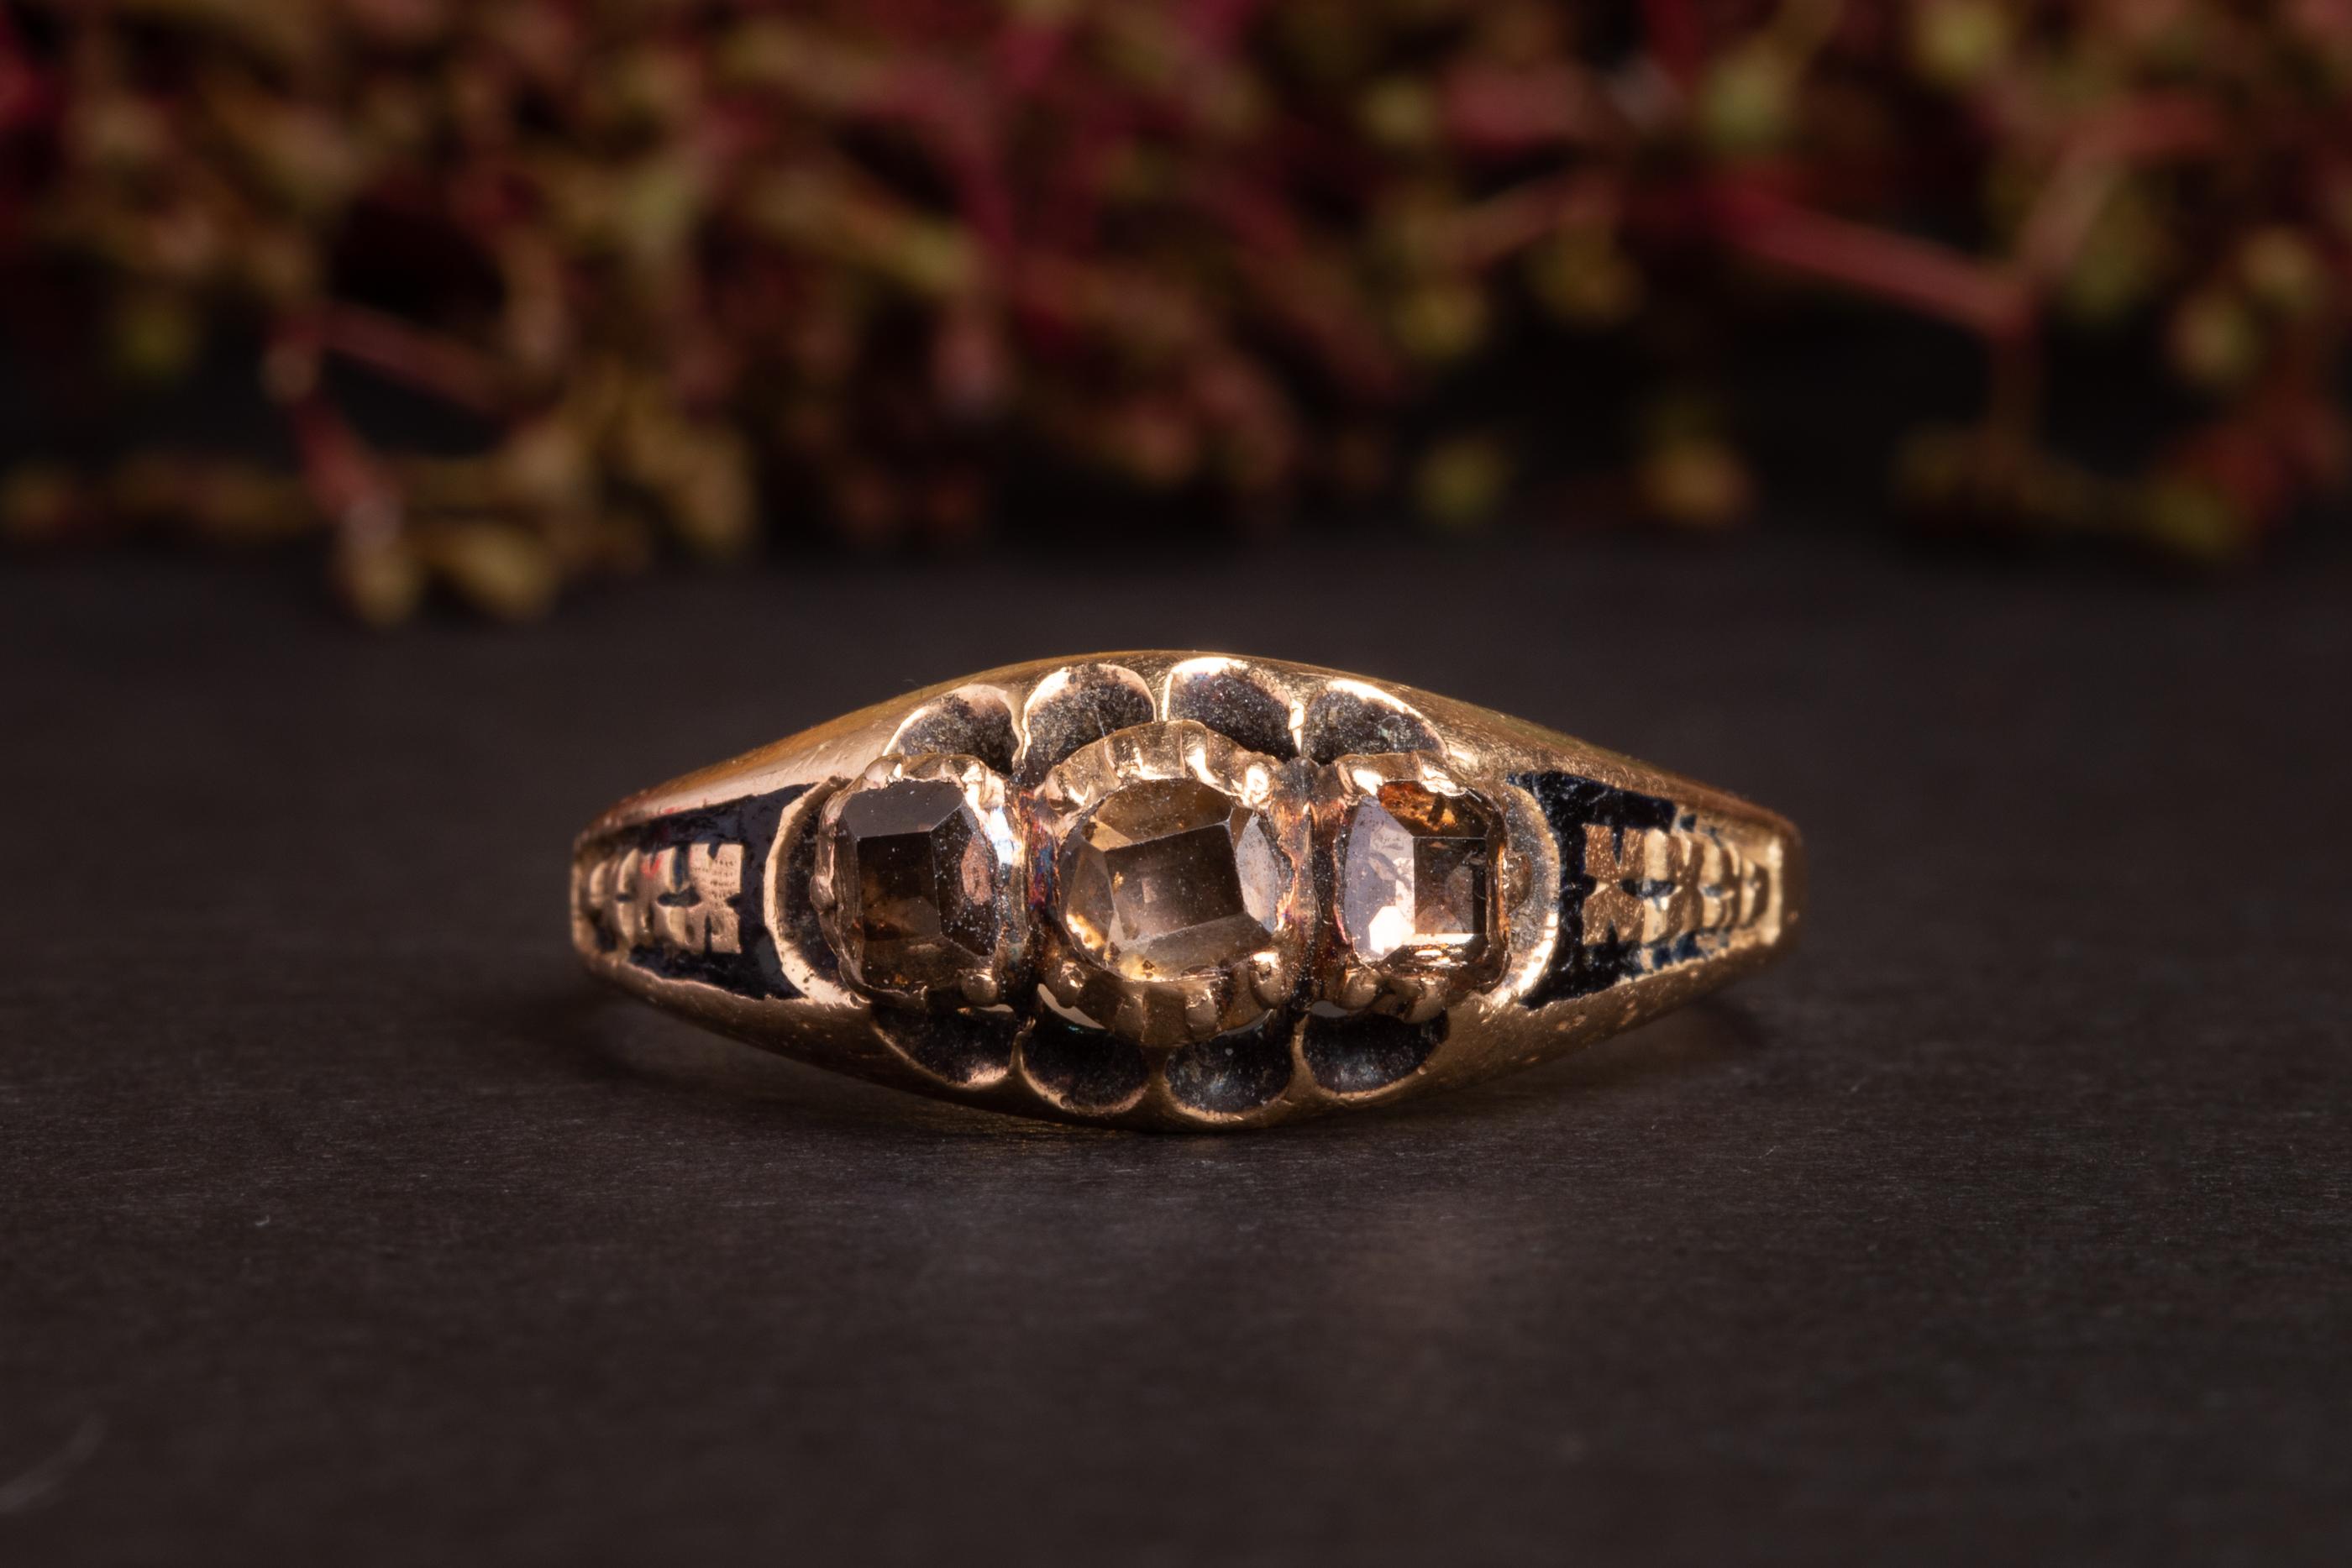 A very old ring of 15 ct gold set with three 'table' cut diamonds. The ring presumably dates to the late 1600's and is preserved in a superb condition.

The shank of the ring is accented with black enamel which has a very minor wear for its age. The